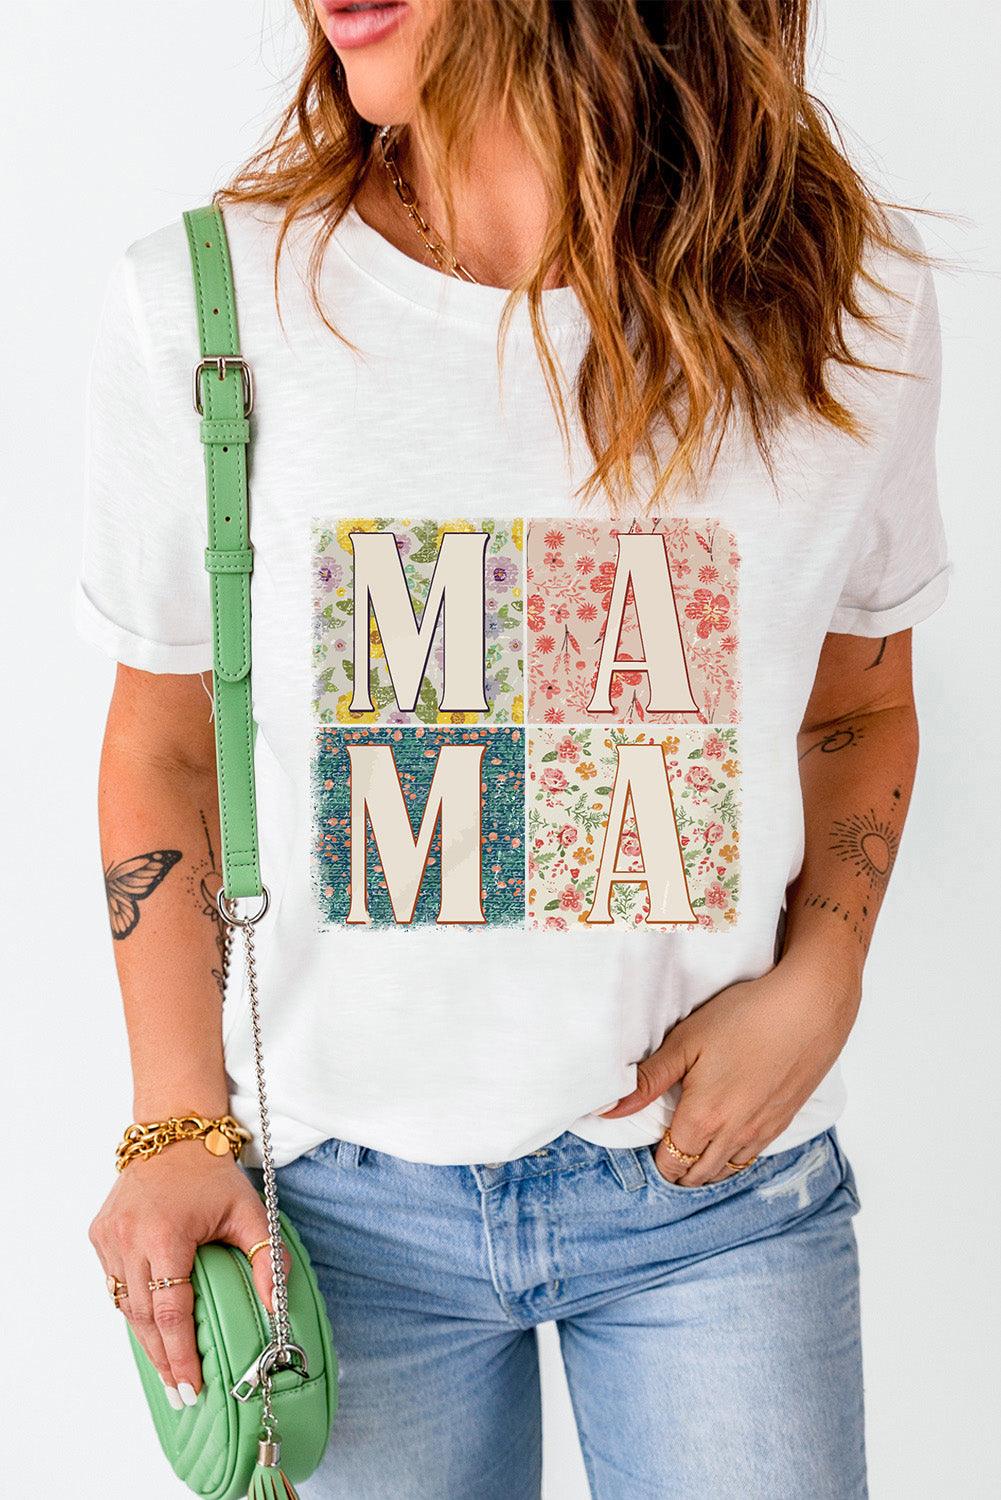 White MAMA Floral Block Graphic Casual T Shirt - L & M Kee, LLC